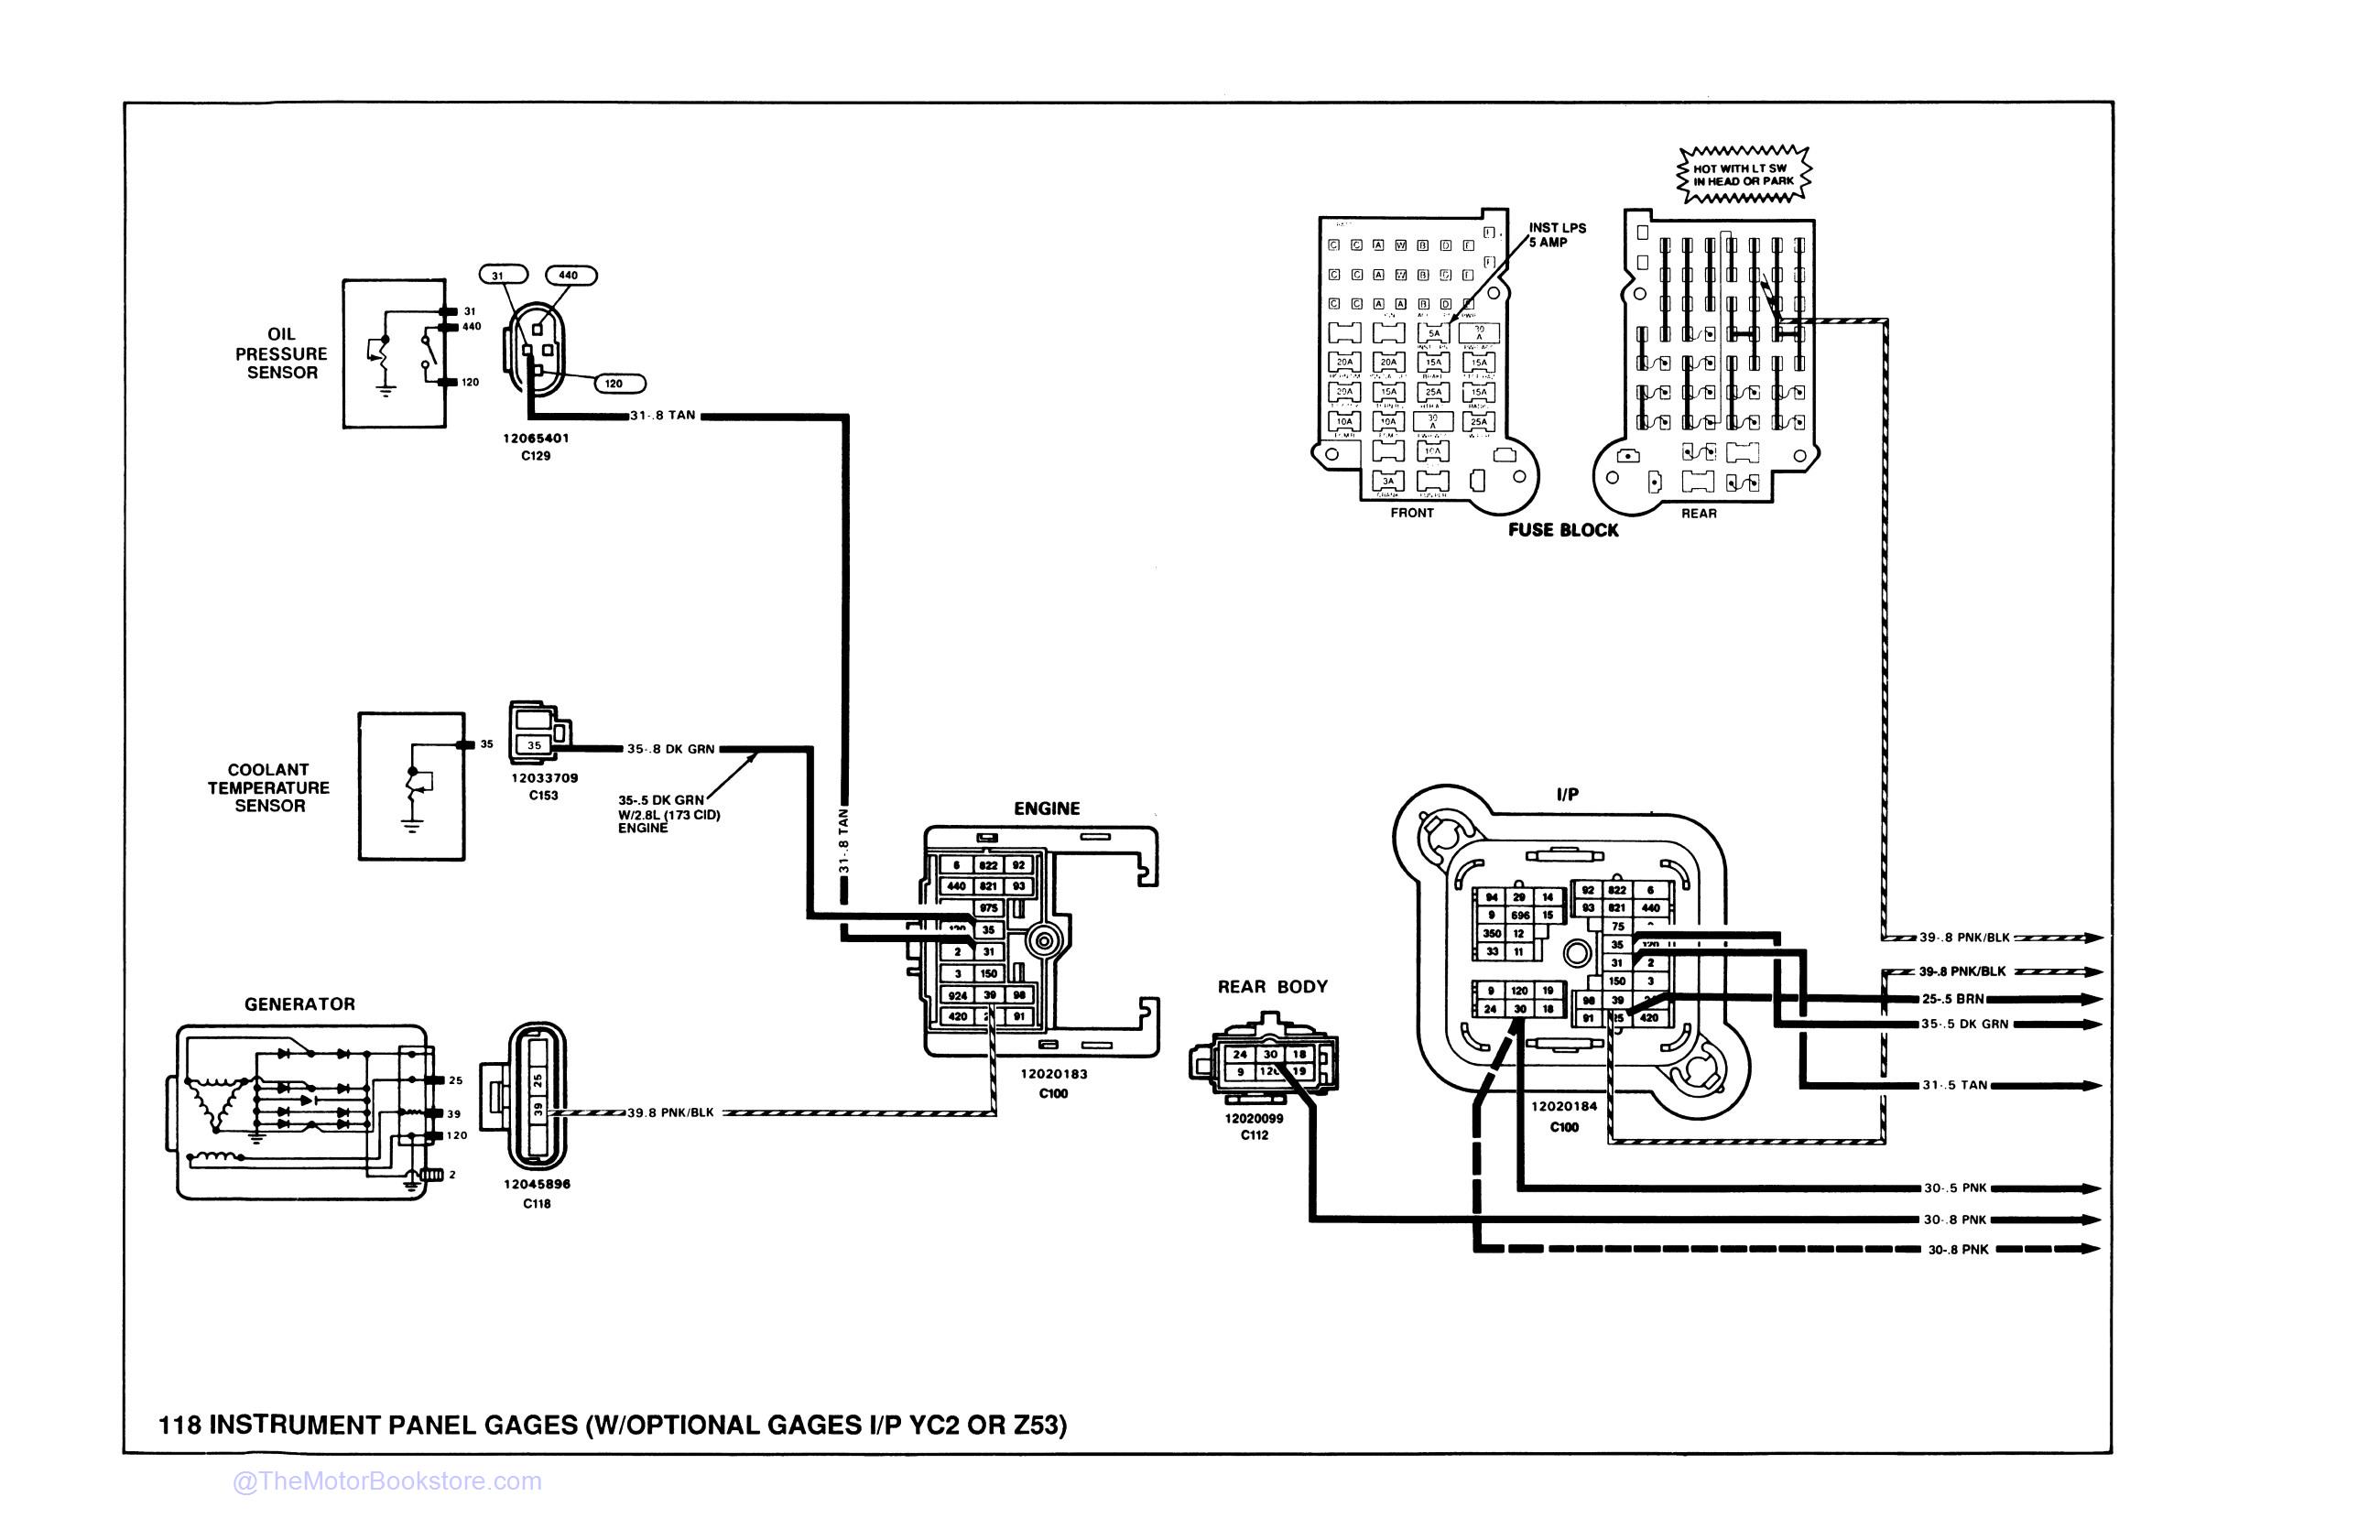 1990 Chevrolet S-10 Truck Electrical Diagnosis & Wiring Diagrams Manual - Sample Page